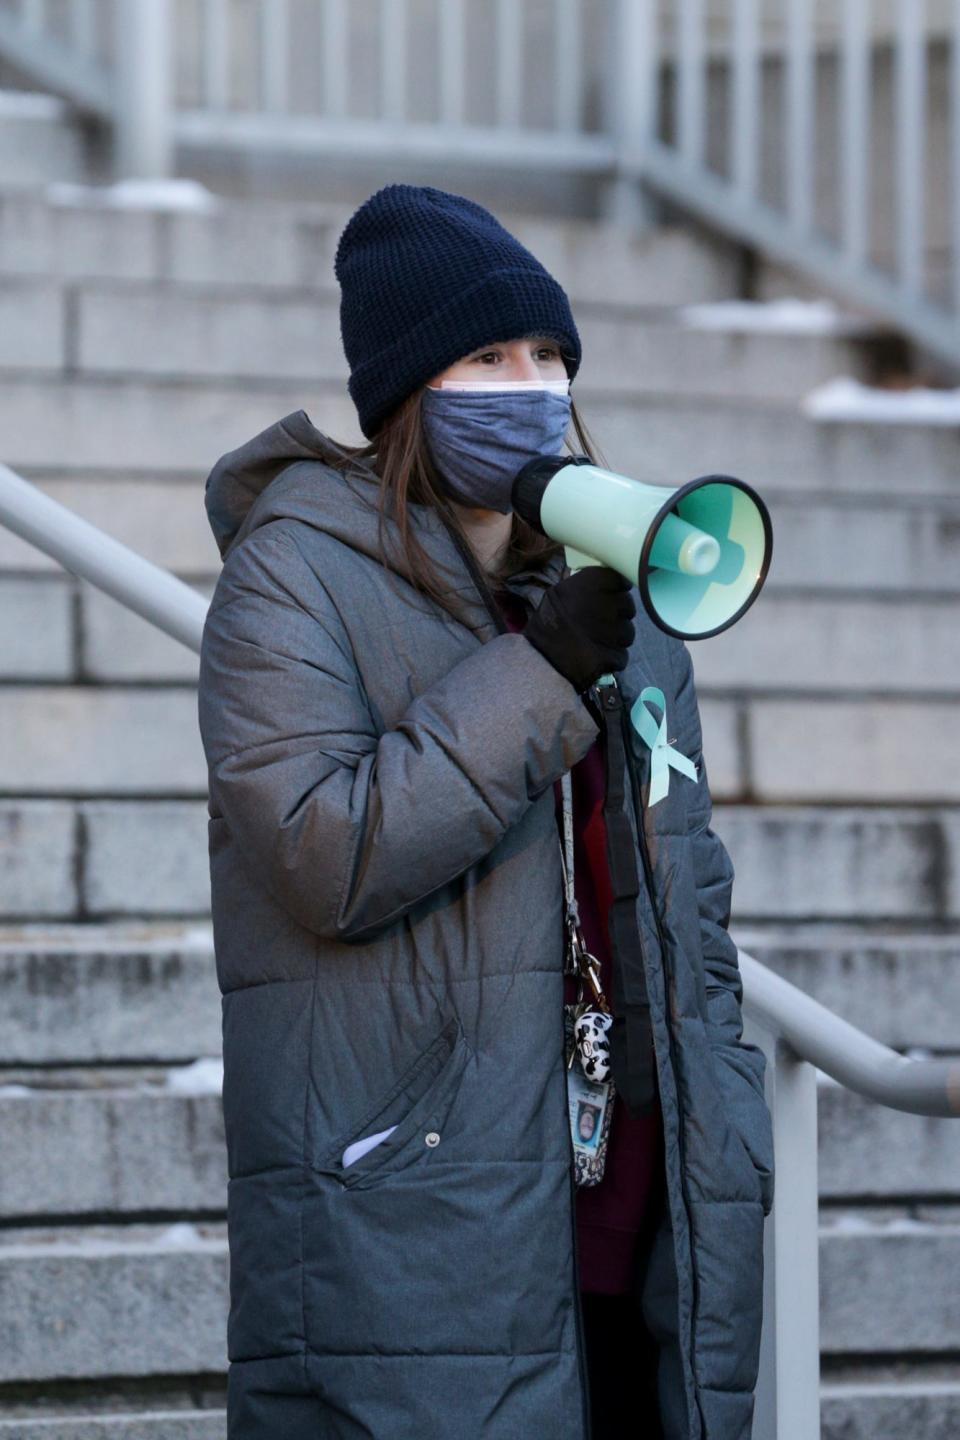 Grace Gochnauer, an organizer with MeTooPurdue, speaks during a solidarity march organized by the group over sexual assaults on Purdue's campus, Friday, Jan. 21, 2022 in West Lafayette.